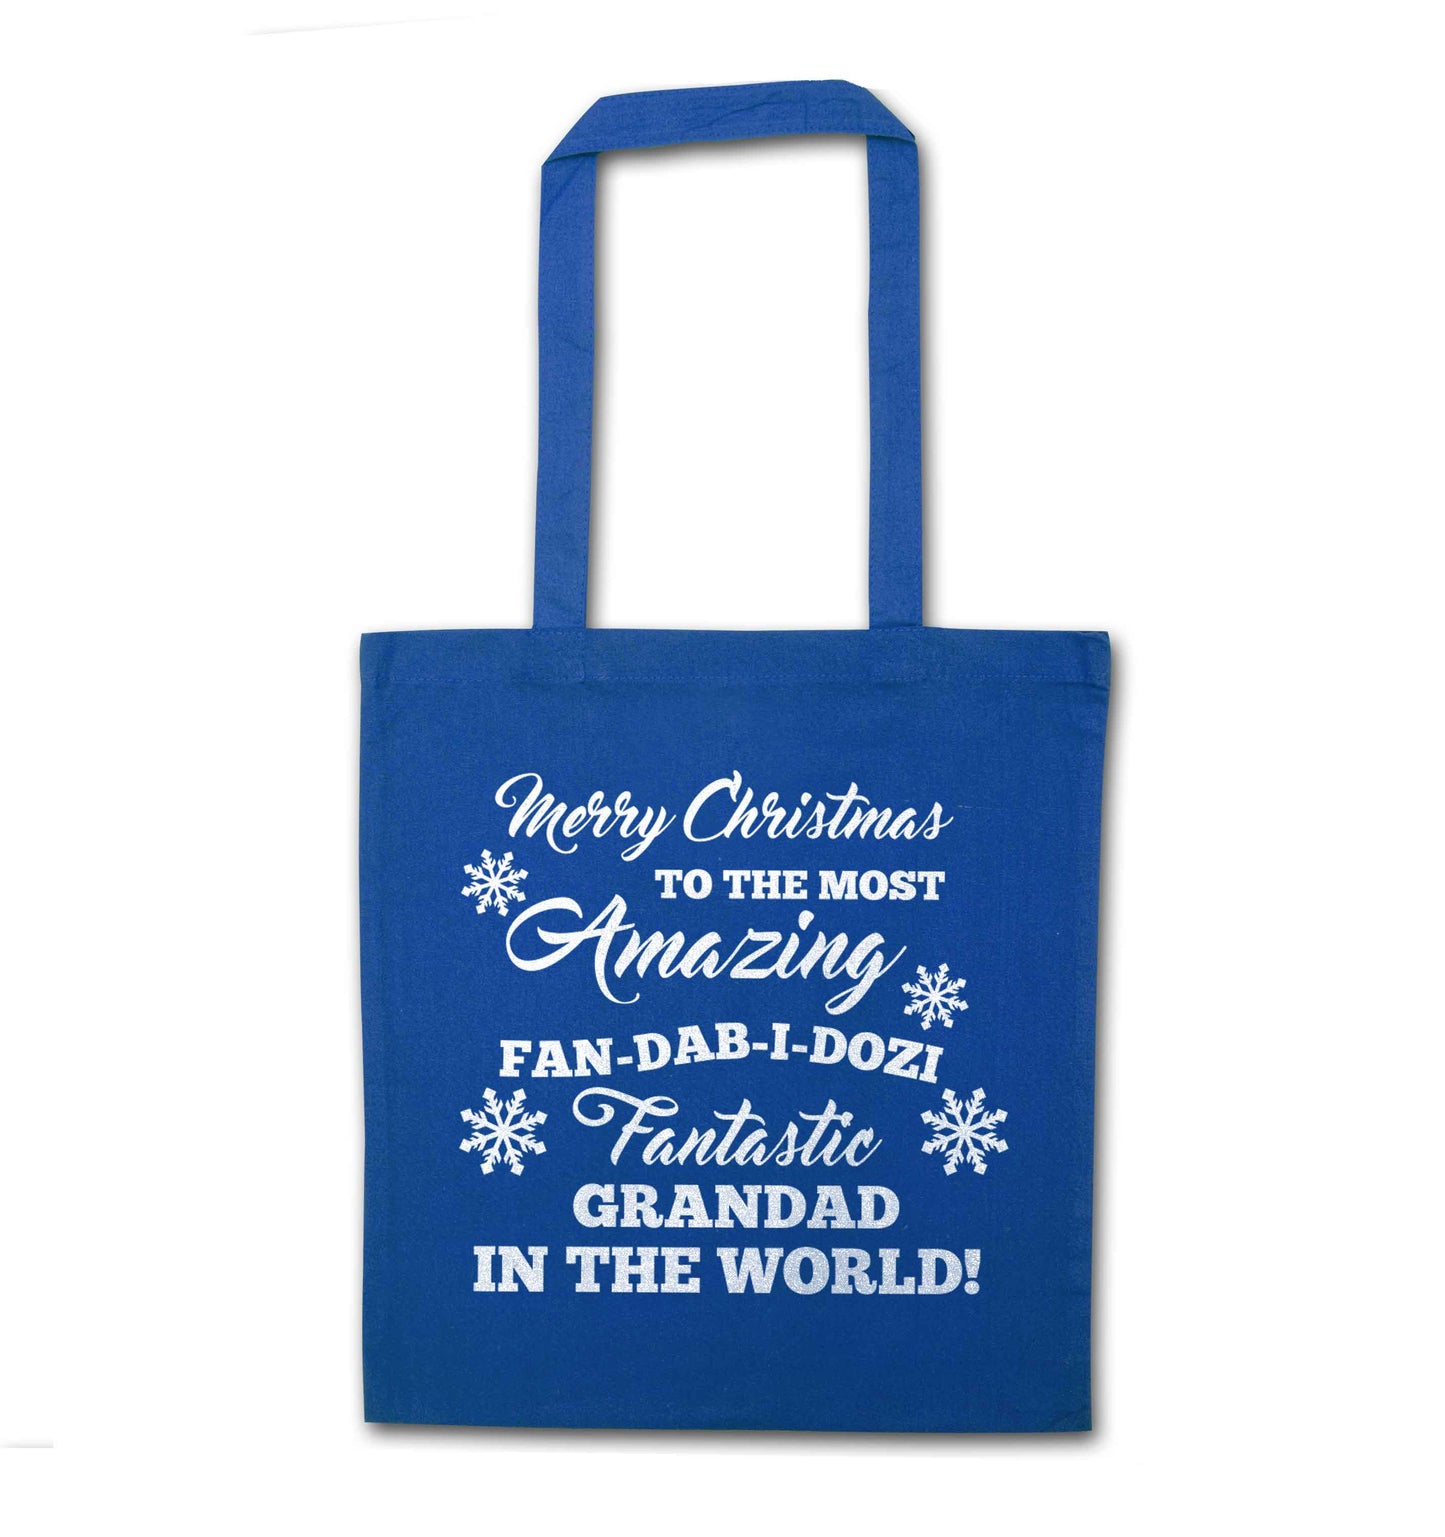 Merry Christmas to the most amazing fan-dab-i-dozi fantasic Grandad in the world blue tote bag